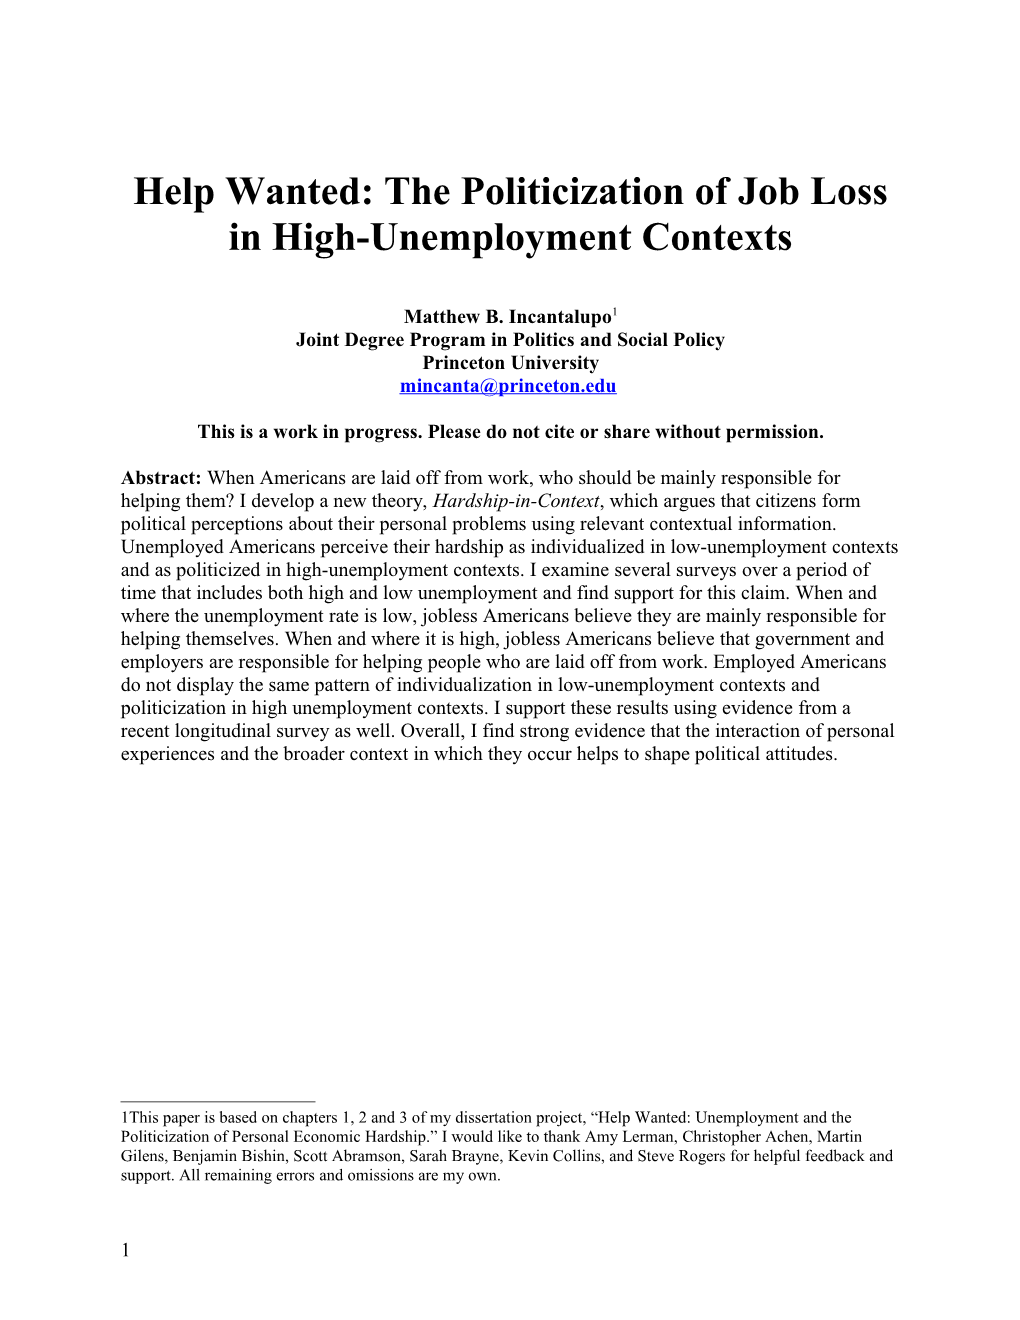 Help Wanted: the Politicization of Job Loss in High-Unemployment Contexts